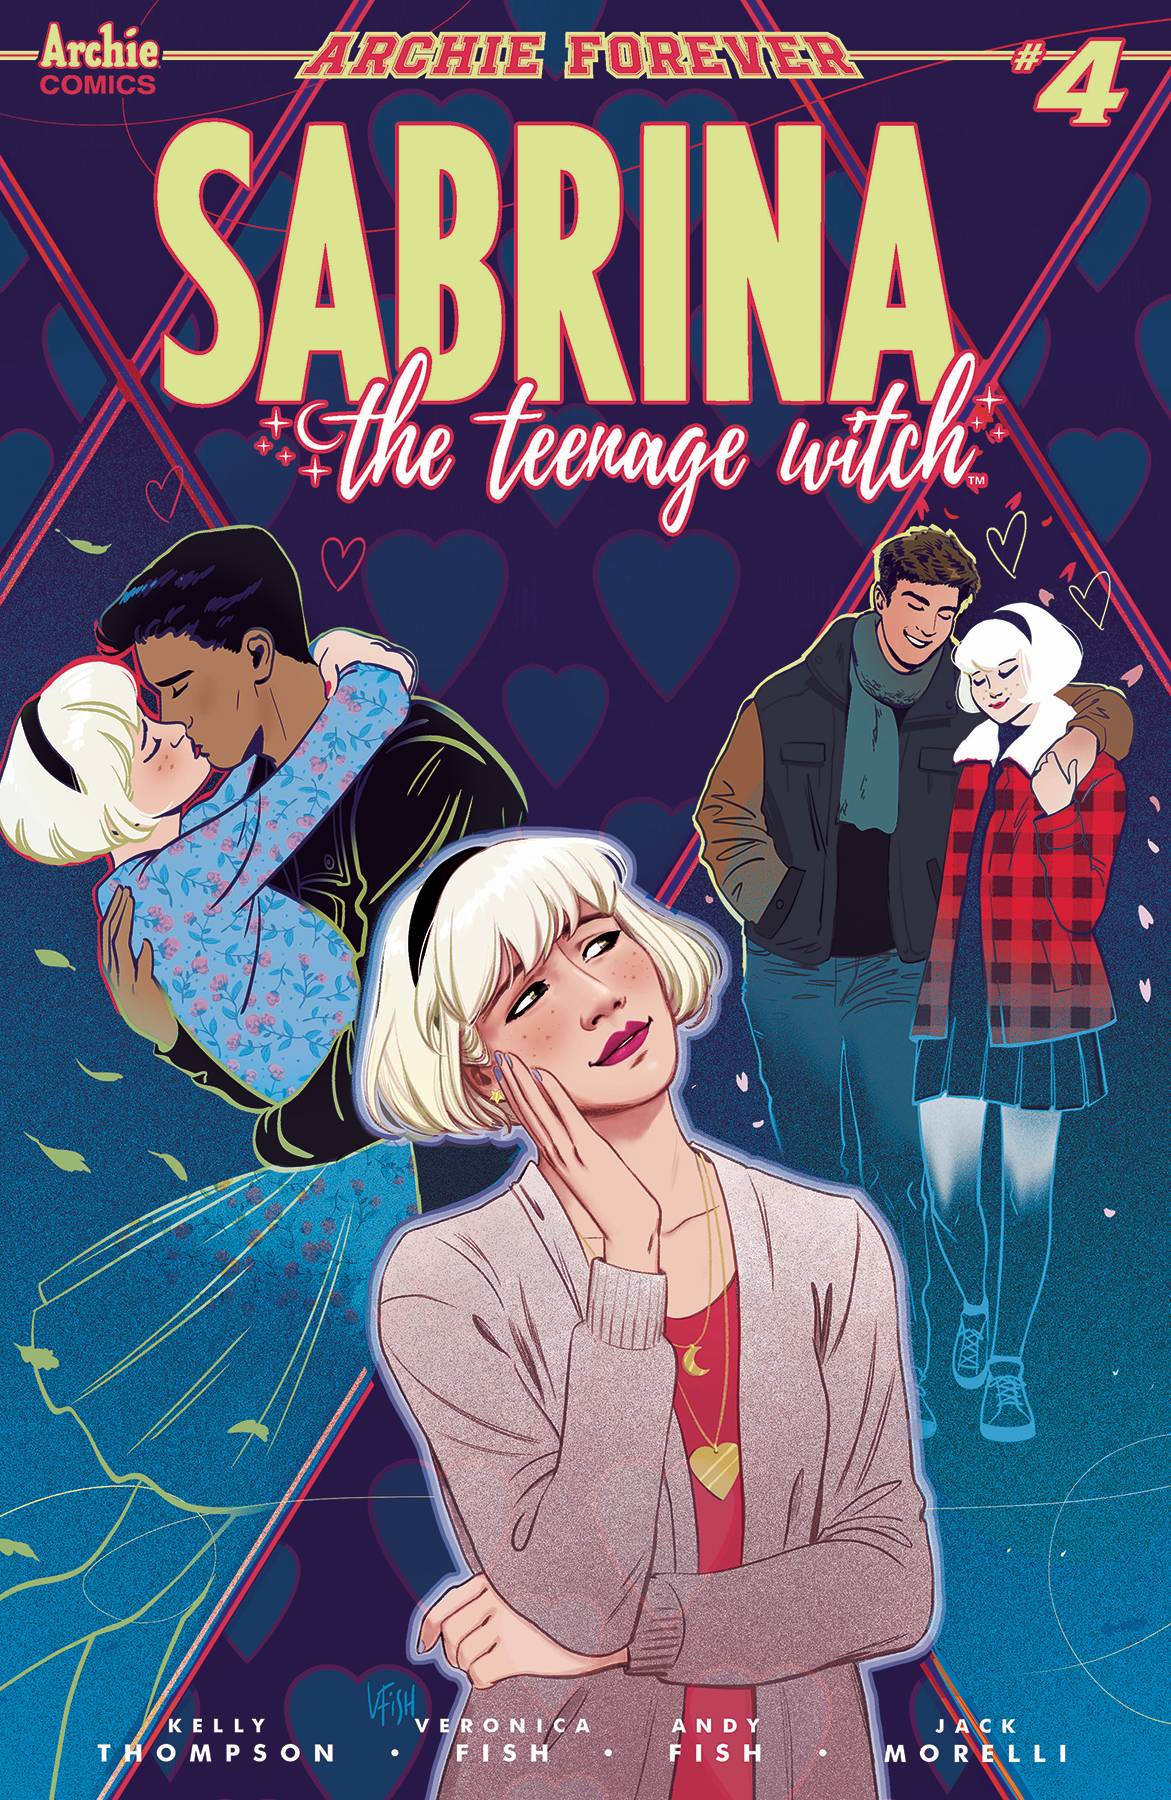 Sabrina Teenage Witch #4 Cover A Fish (Of 5)